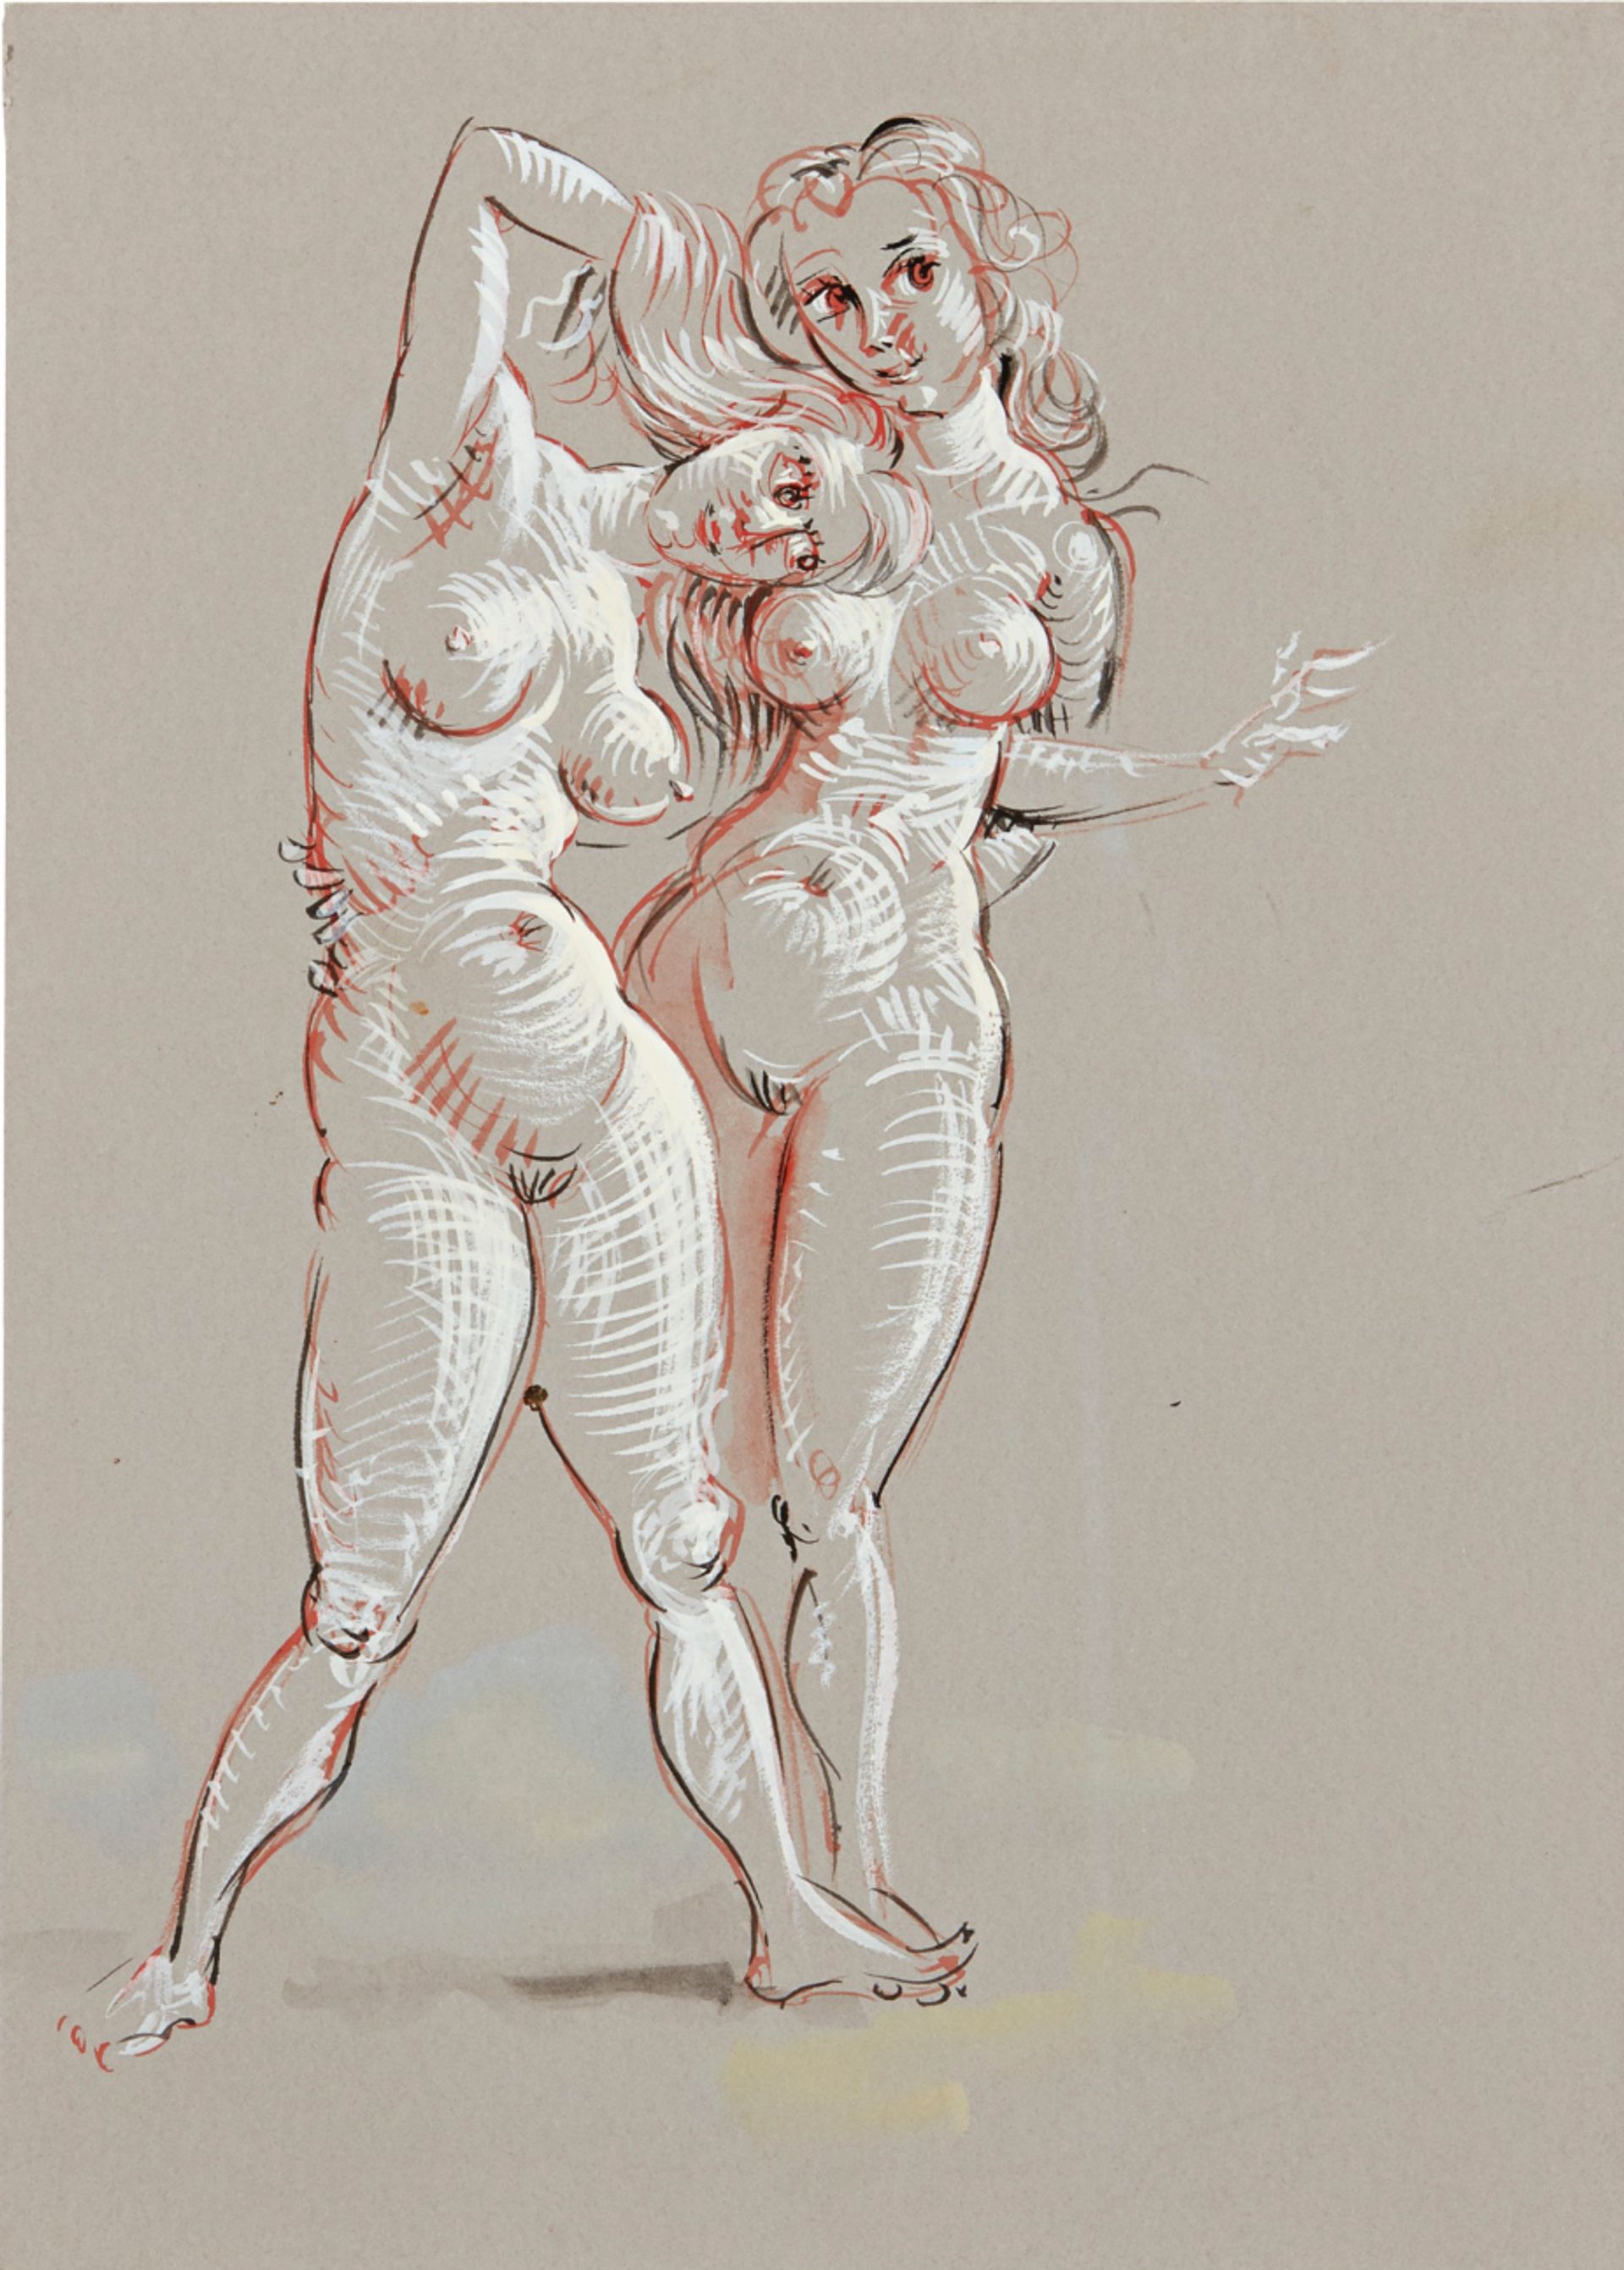 John Currin's Friends (1998) is one of two works from the collection of David Teiger annotated with the curvaceous M Courtesy of Sotheby's